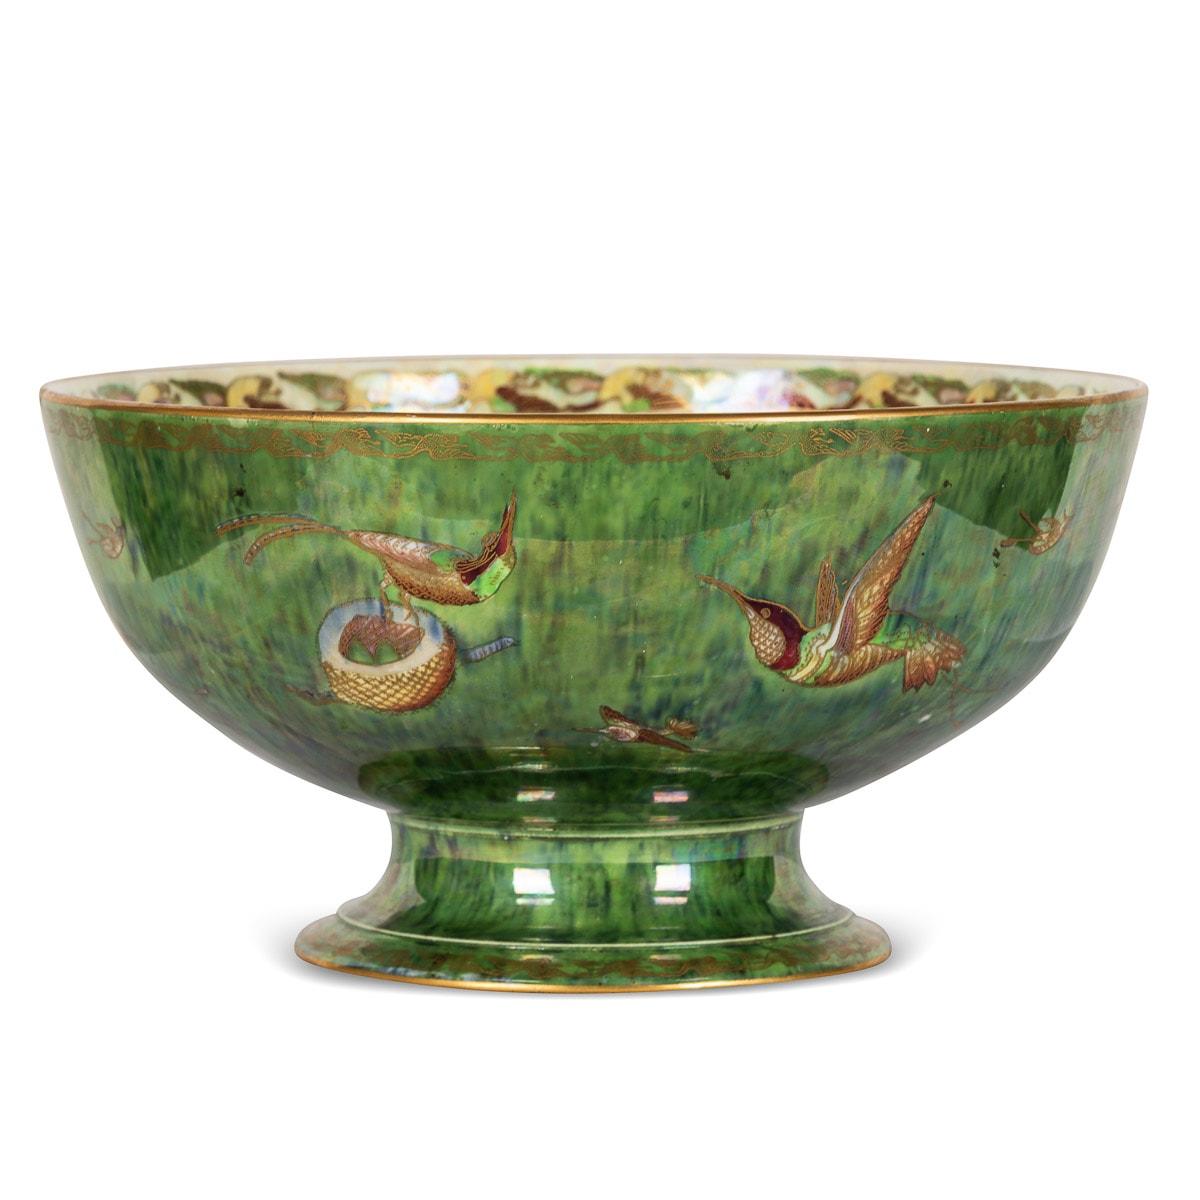 Antique early-20th Century Wedgwood large and impressive lustreware bowl, decorated inside and out with hummingbirds on green ground. Underneath with Wedgwood mark, England, circa 1920. Designed by Susannah Margaretta 